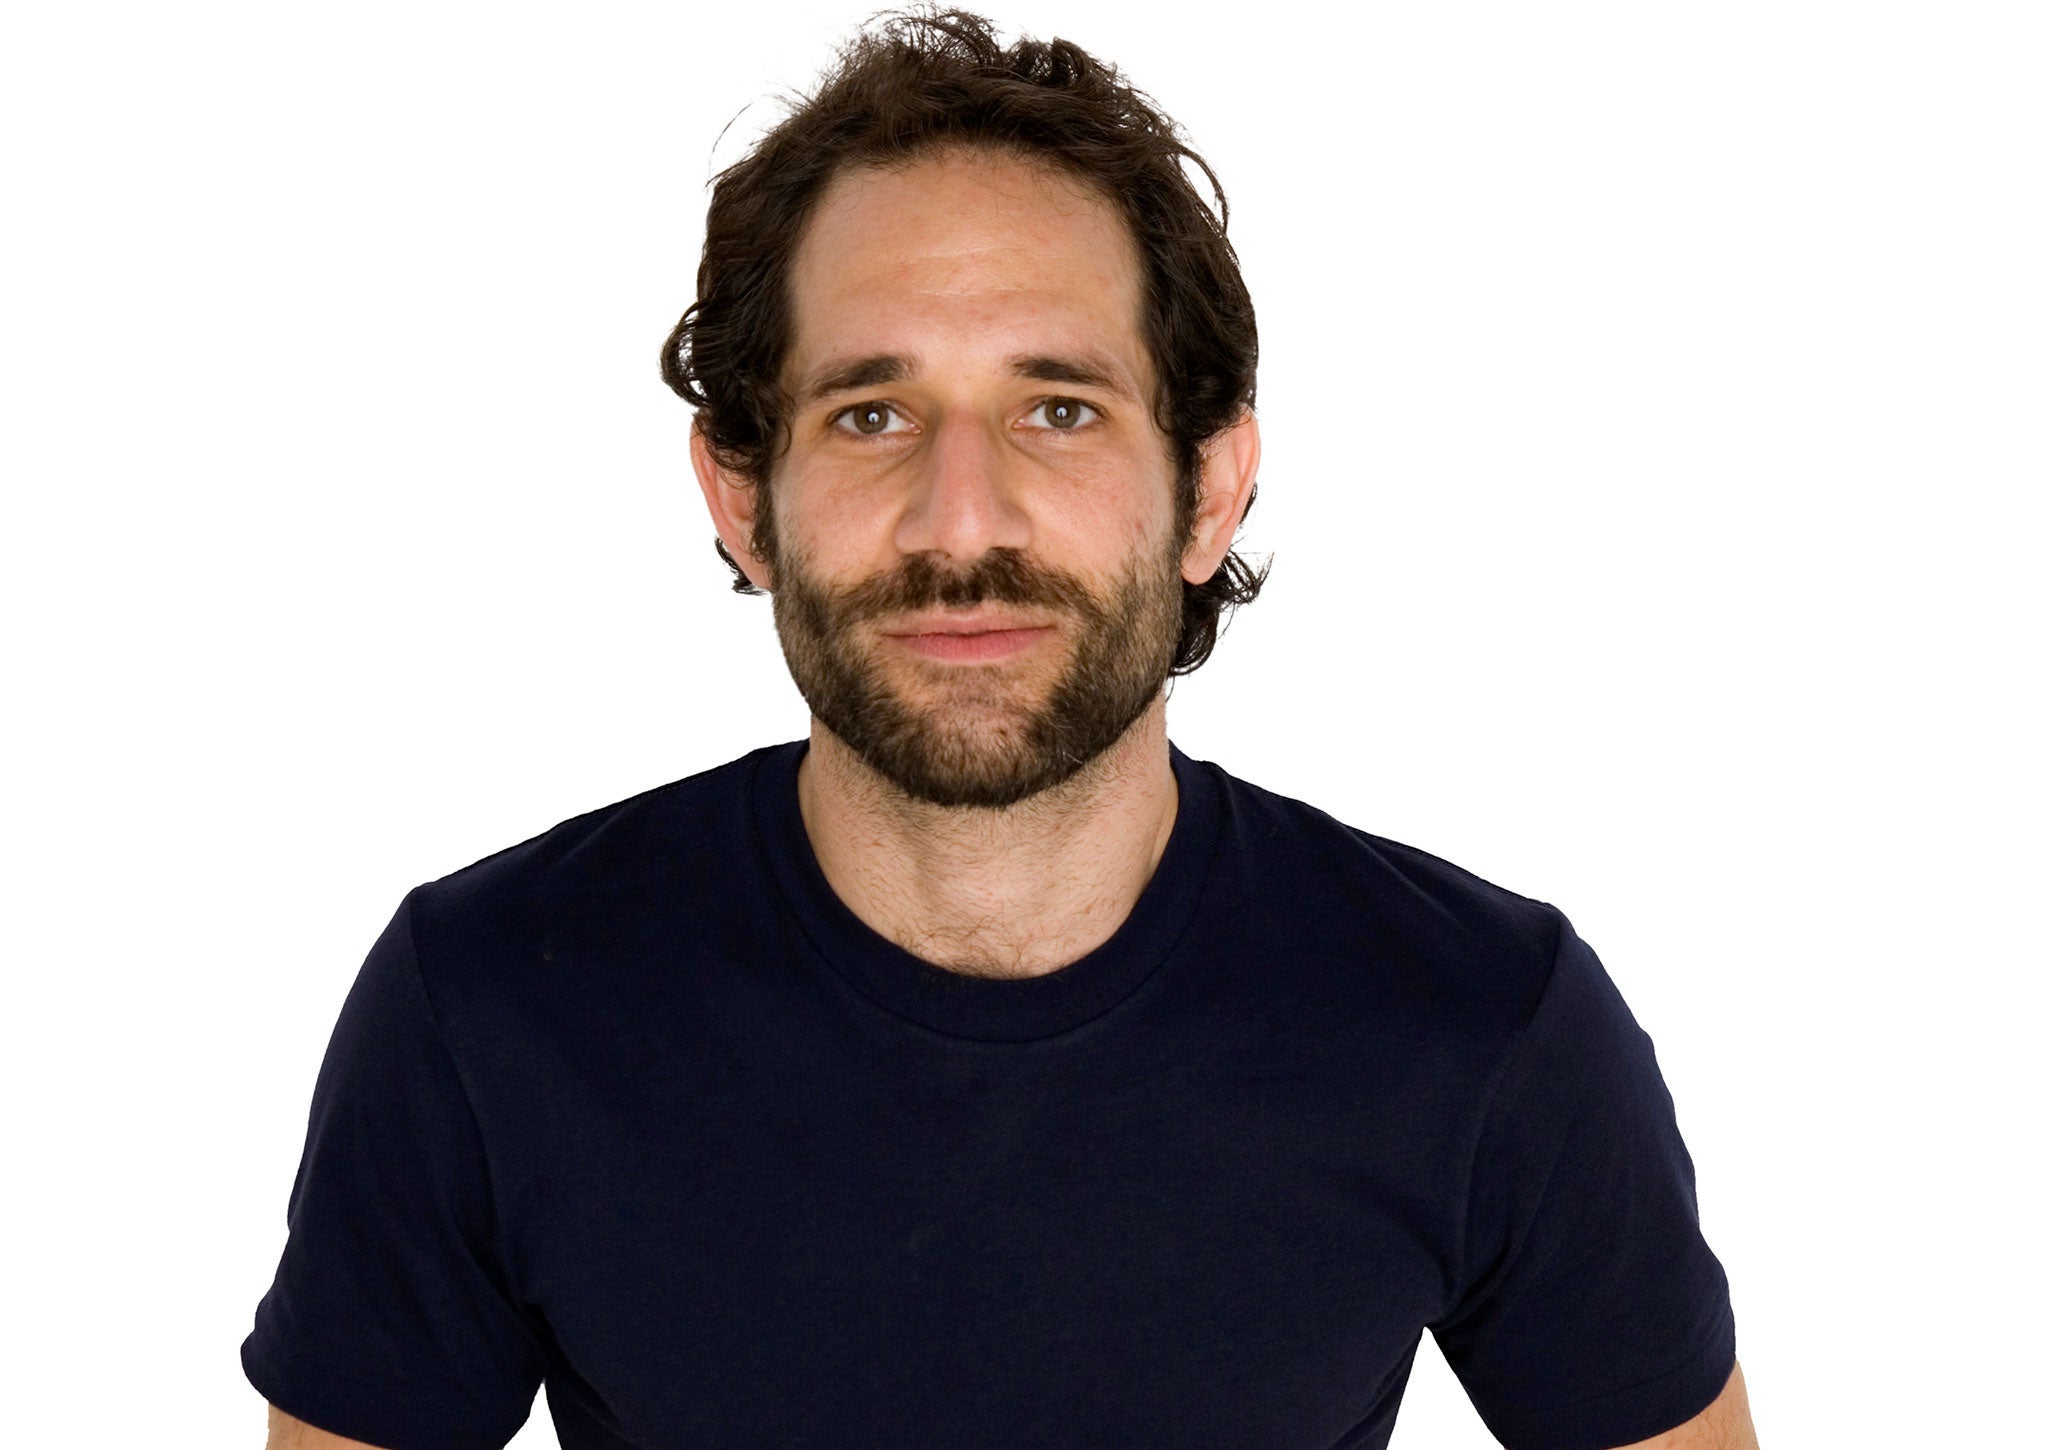 Dov Charney, the founder, president and CEO of American Apparel